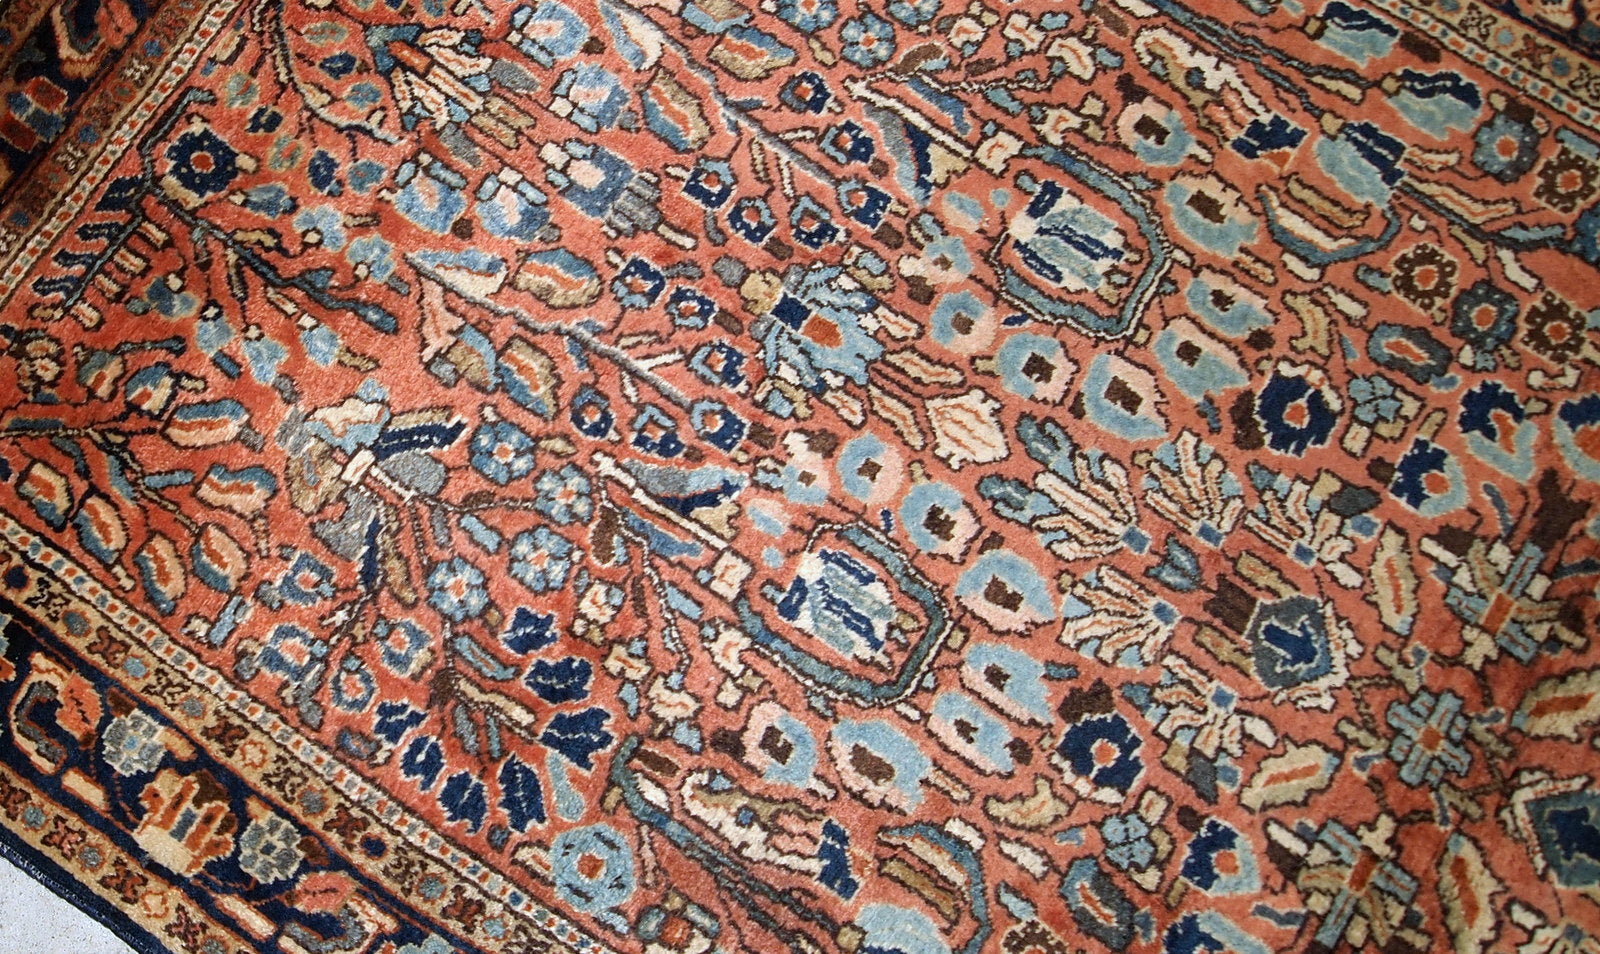 Hand-weaved antique Sarouk rug from the beginning of 20th century. The rug is in original good condition, made in classic floral design in red and sky blue shades.